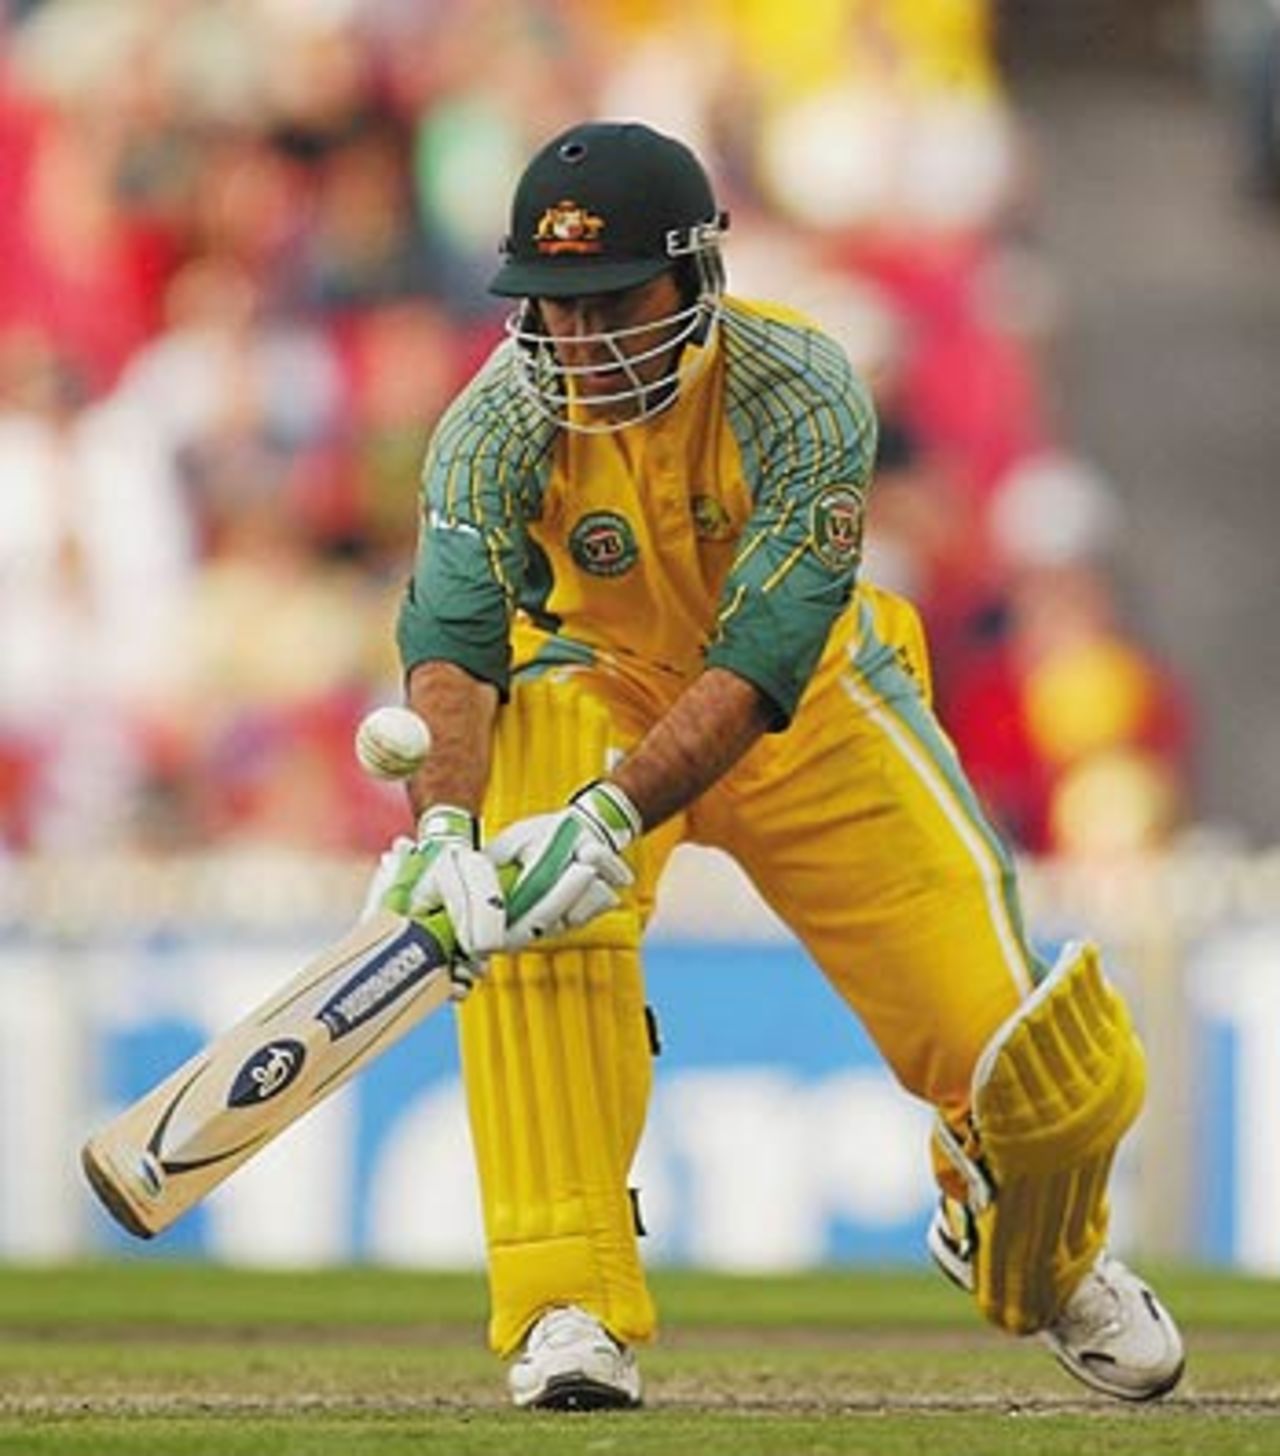 Ricky Ponting shows no respite as he toys with the bowlers, Australia v India, VB Series, 1st final, Melbourne, February 6, 2004